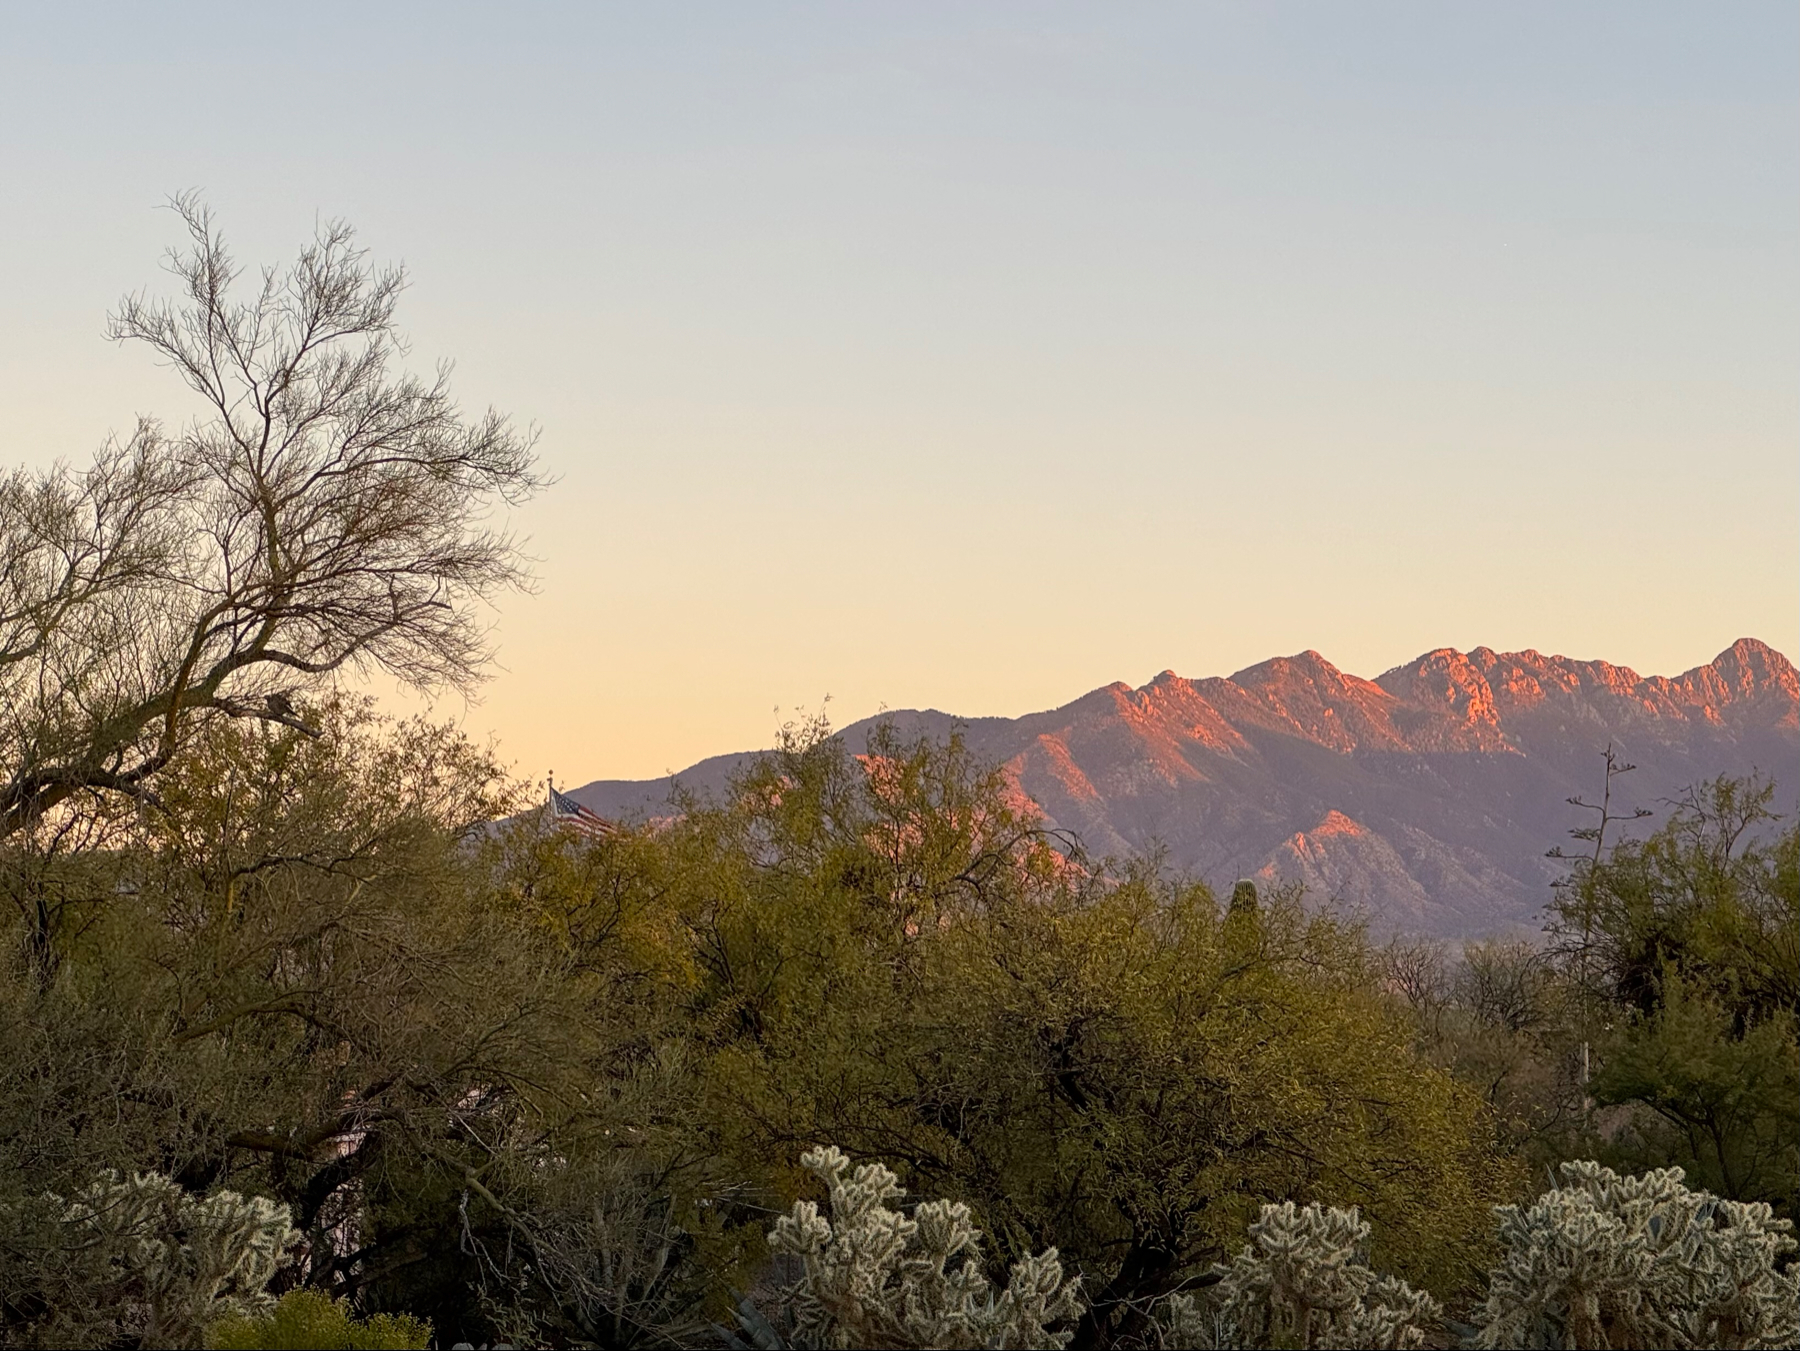 Sunset over mountain range with trees and cacti in the foreground.